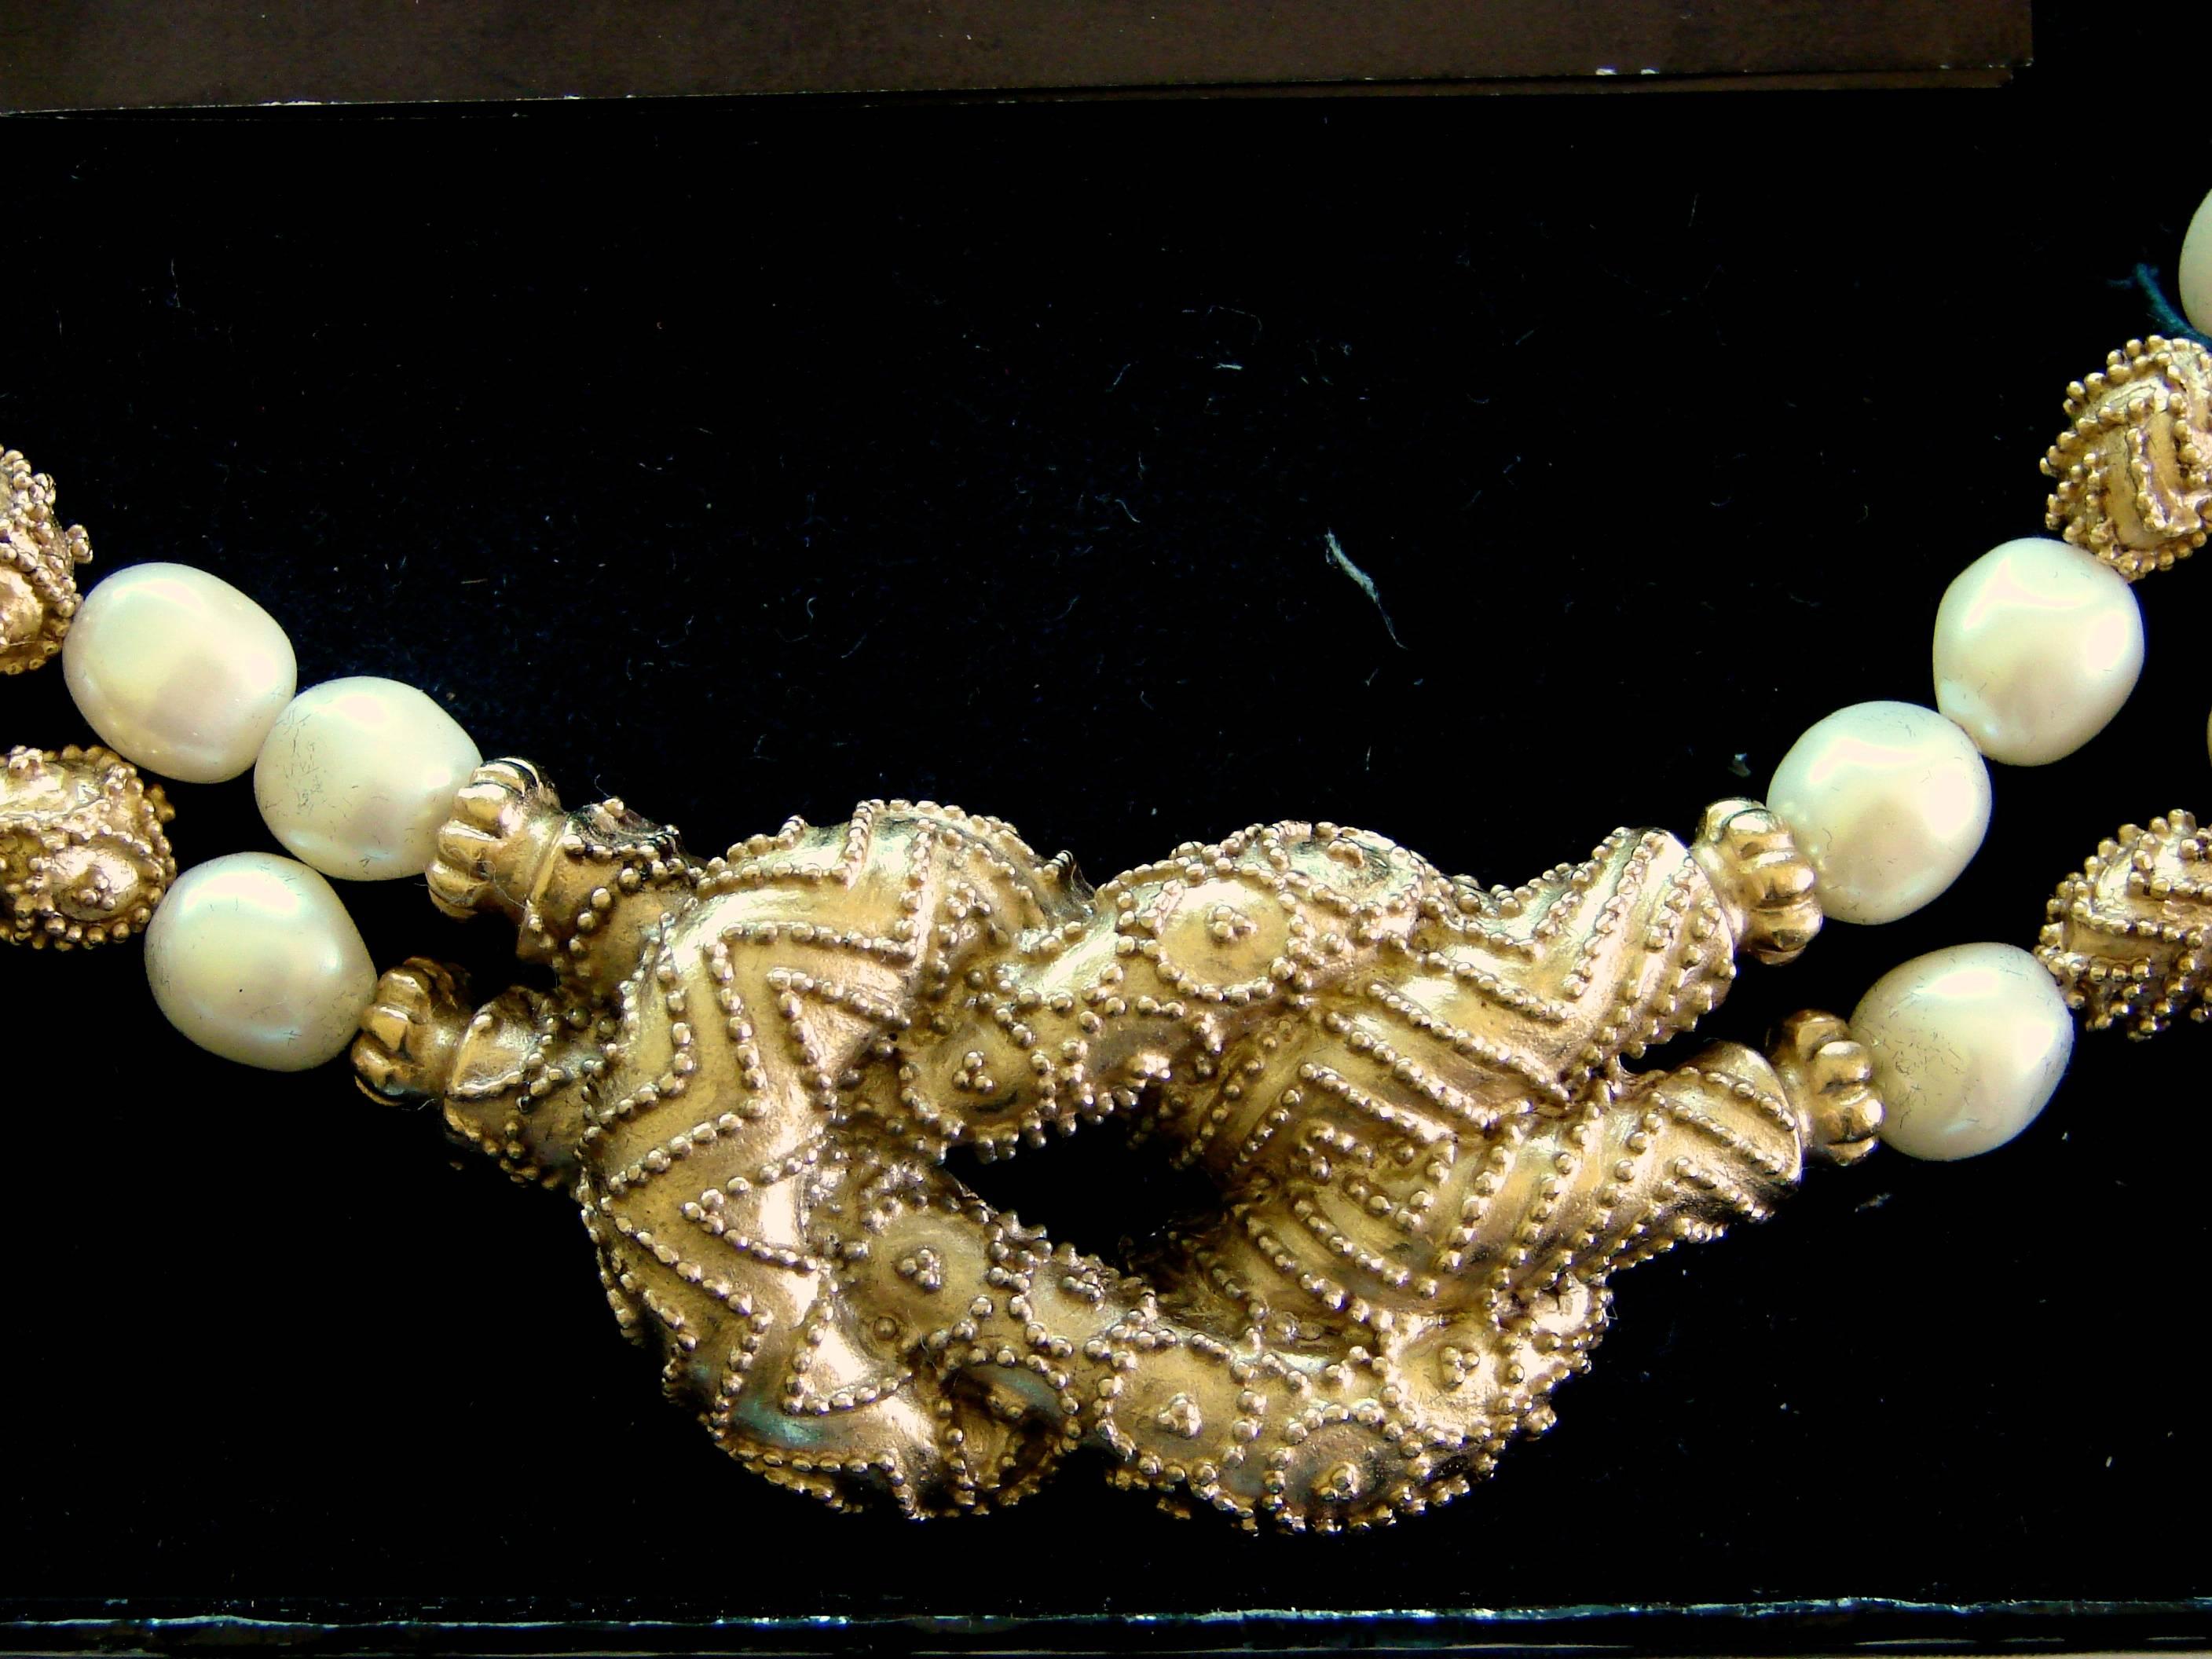 This chic double strand Etruscan style necklace was designed by Mary McFadden in 1988 and sold exclusively by the Franklin Mint as part of a limited edition.  Made from 22ct gold electroplate beads, this piece features faux Baroque pearls and a